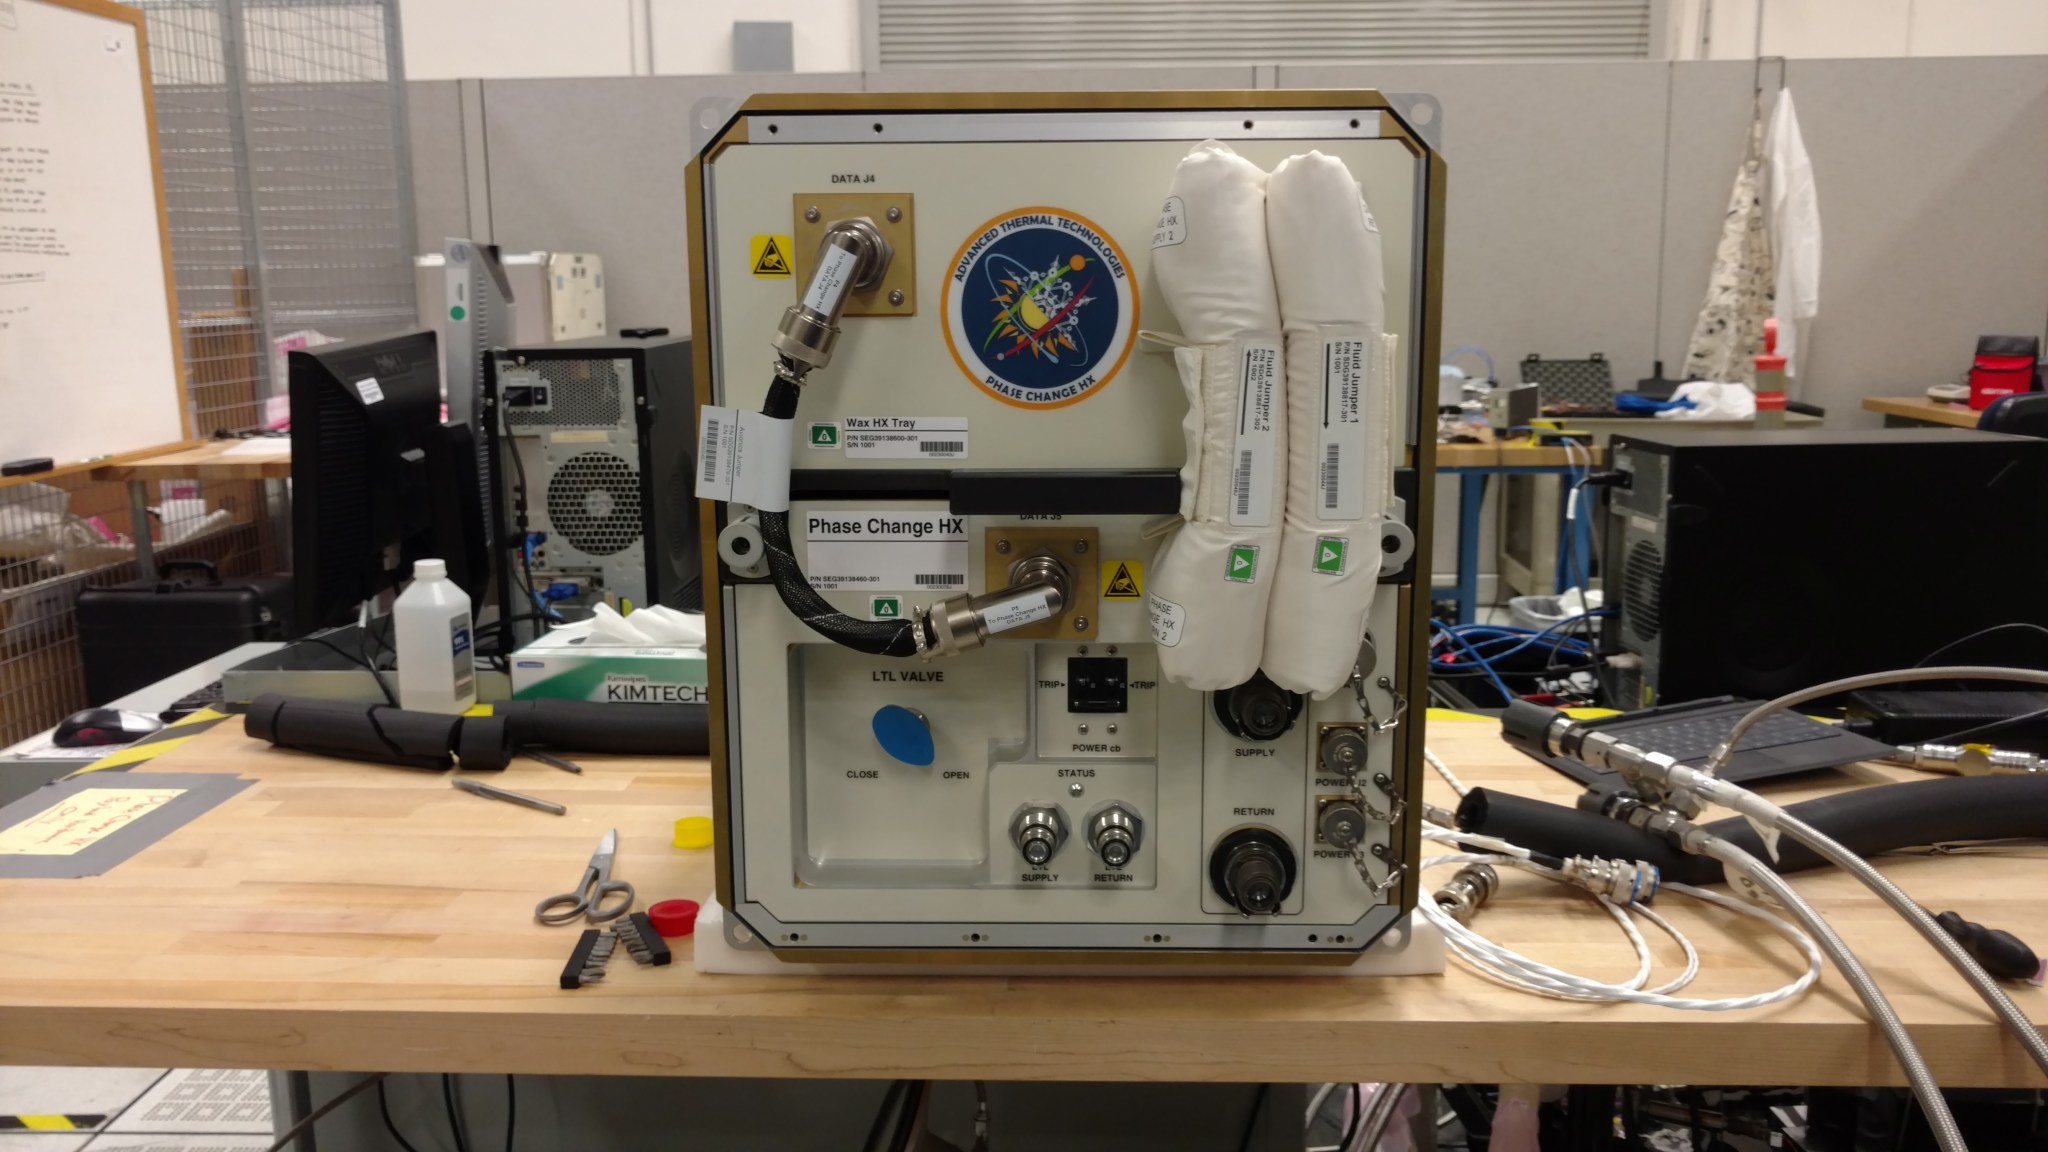 NASA is sending a Phase Change Heat Exchanger to the ISS to test thermal control capabilities aboard the orbiting laboratory.